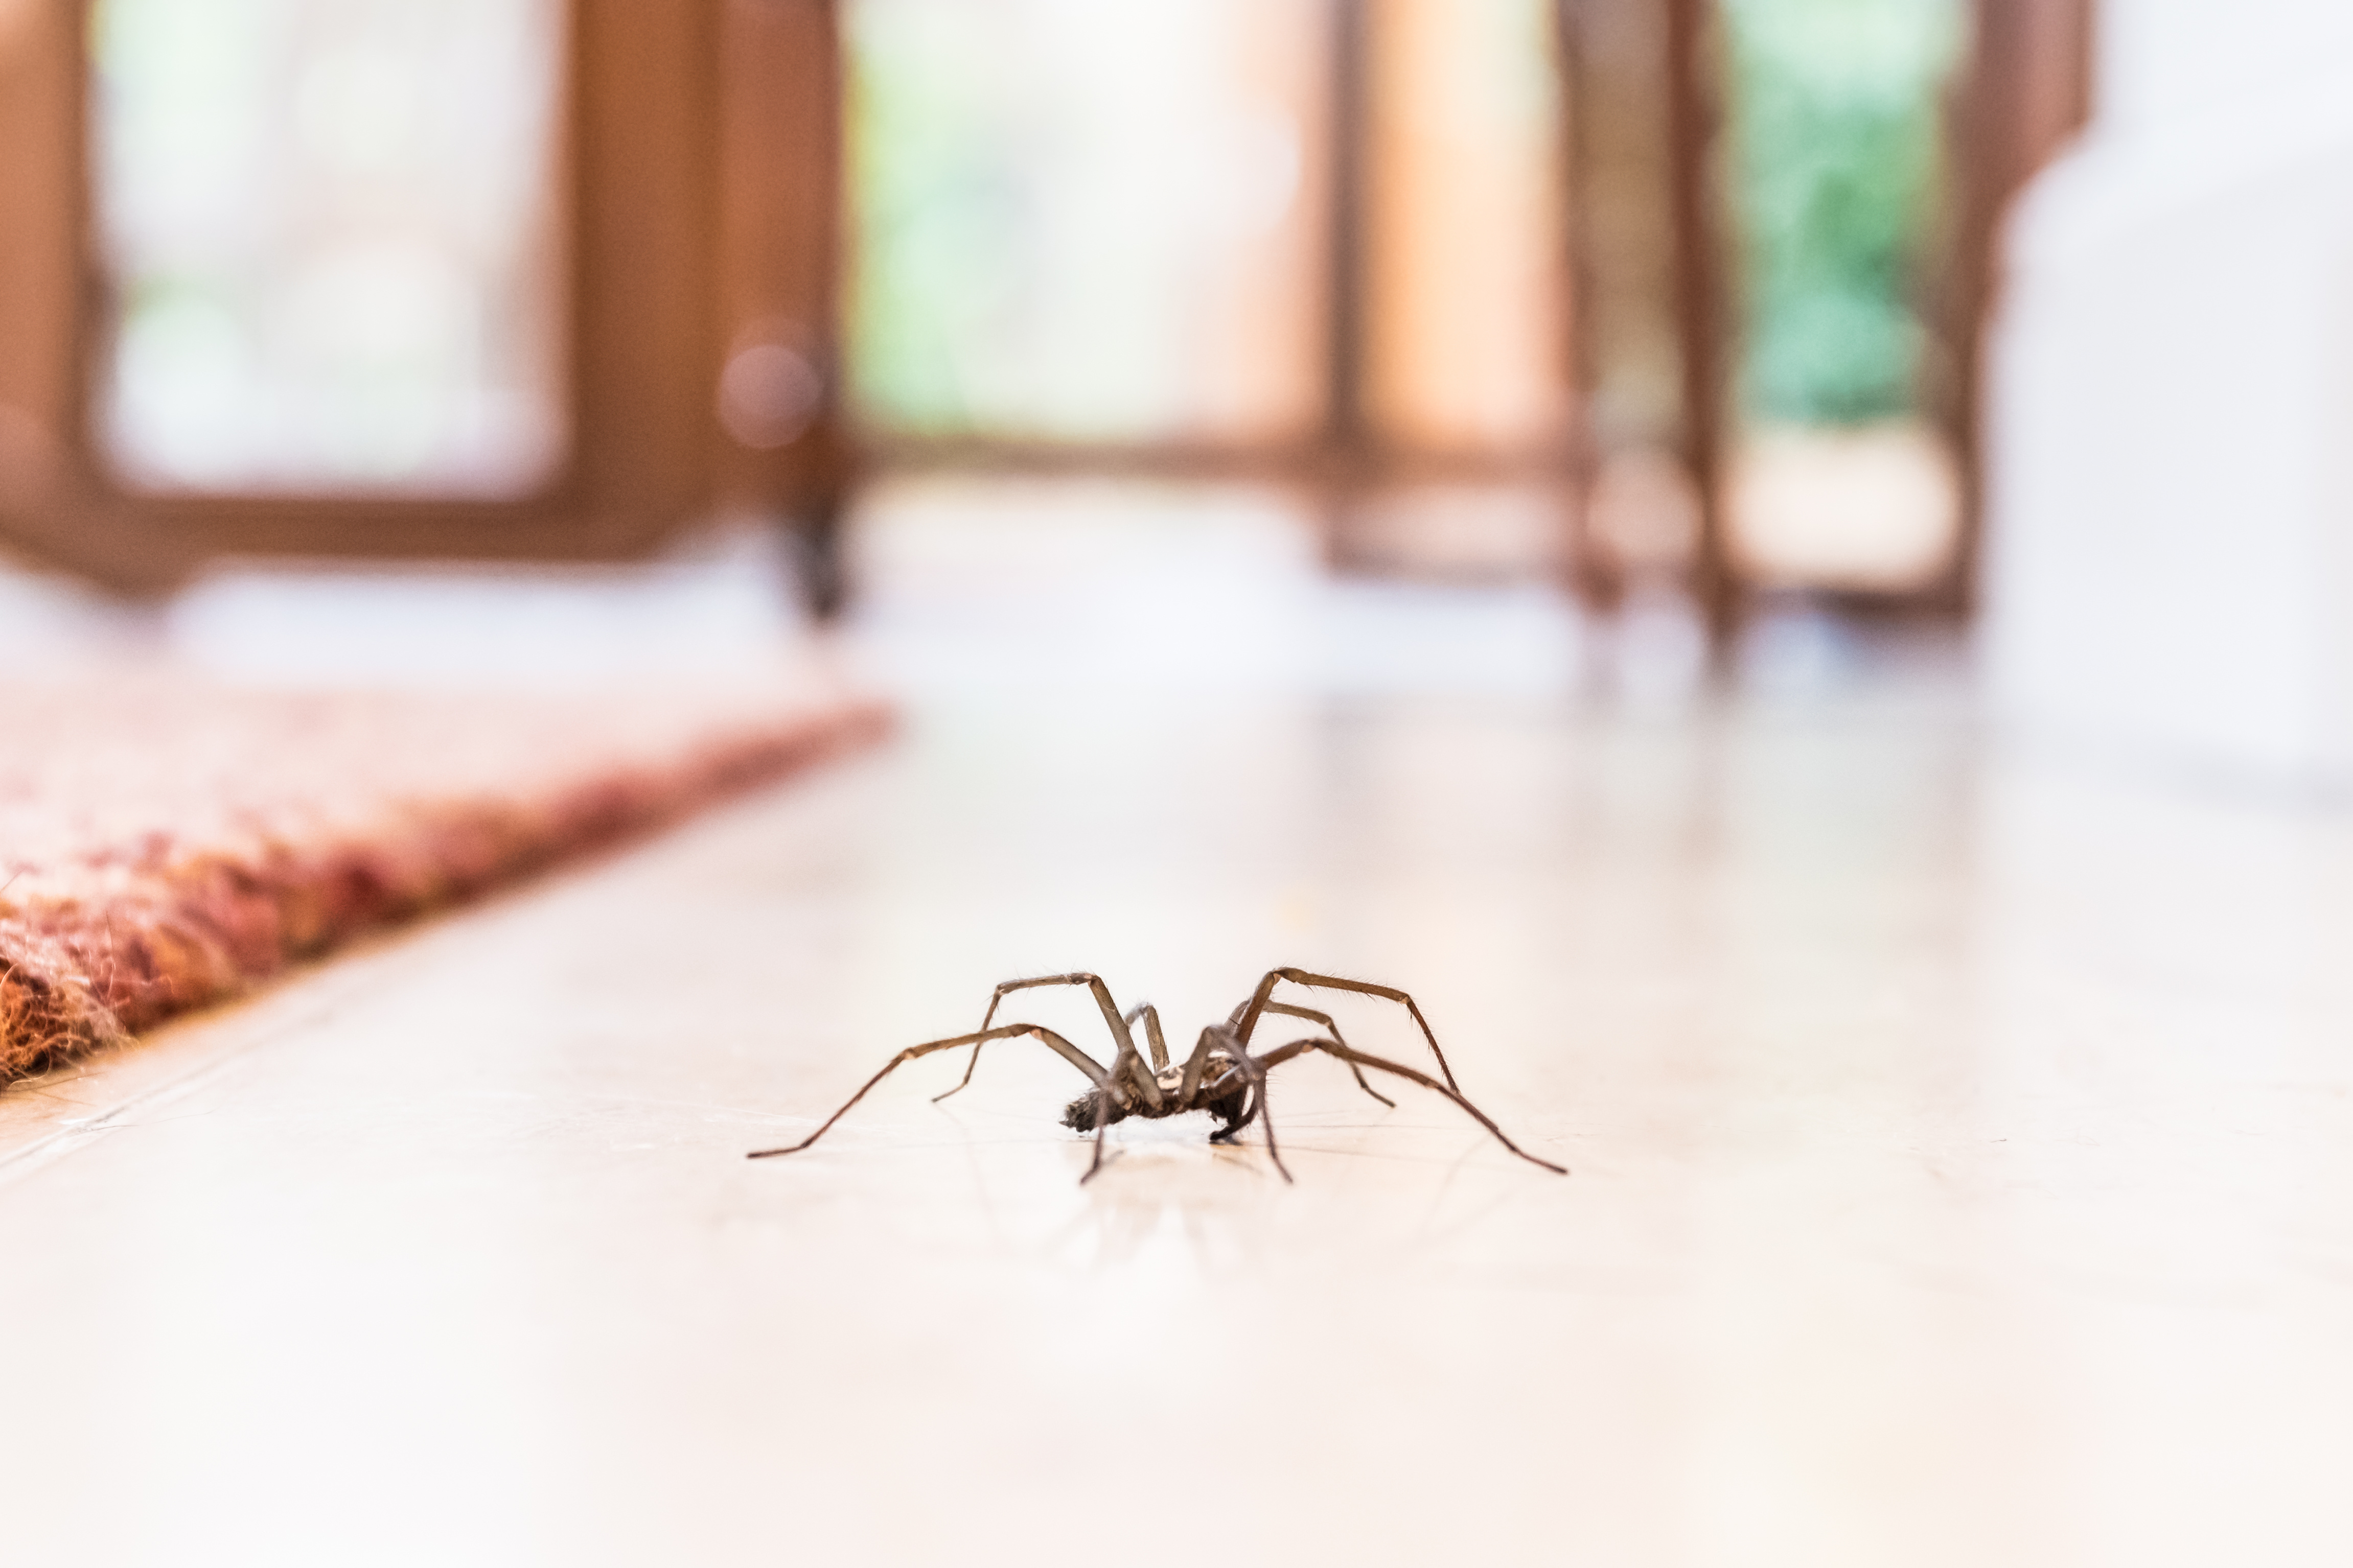 A spider scuttling across a hardwood floor - contact GGA Pest Management Waco today for professional spider removal.